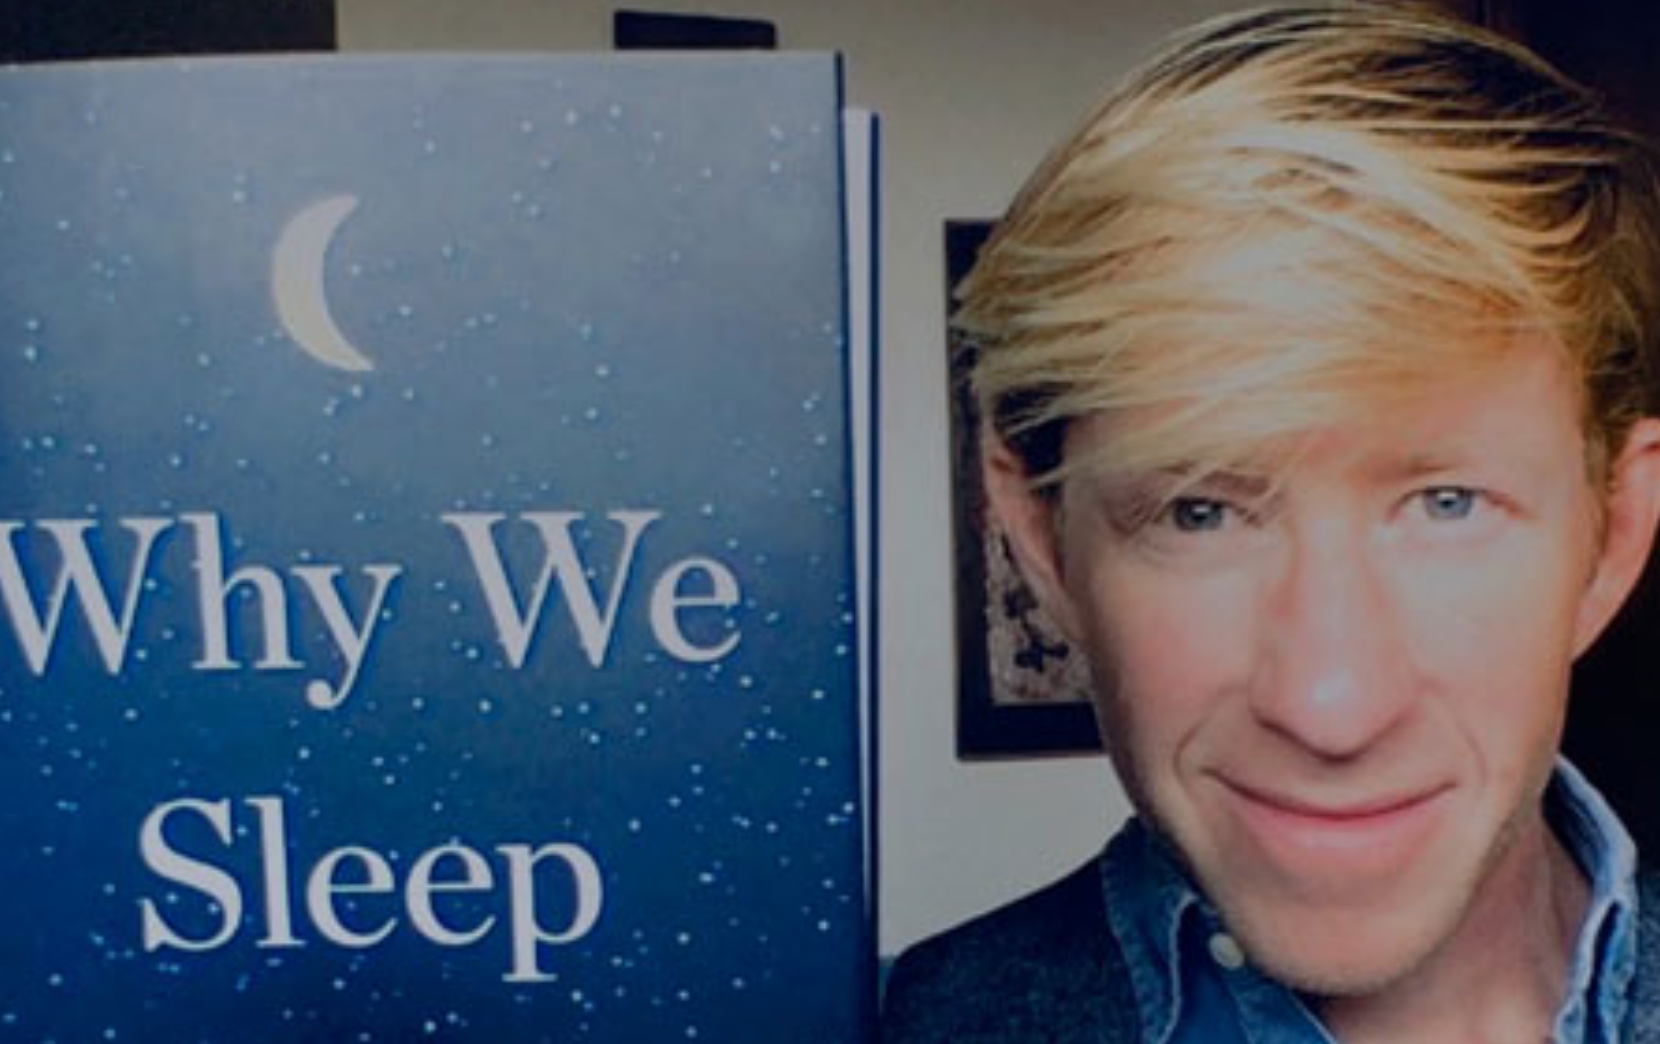 Top 10 Quotes and 6 Key Takeaways from the Book 'Why We Sleep' by Matthew Walker